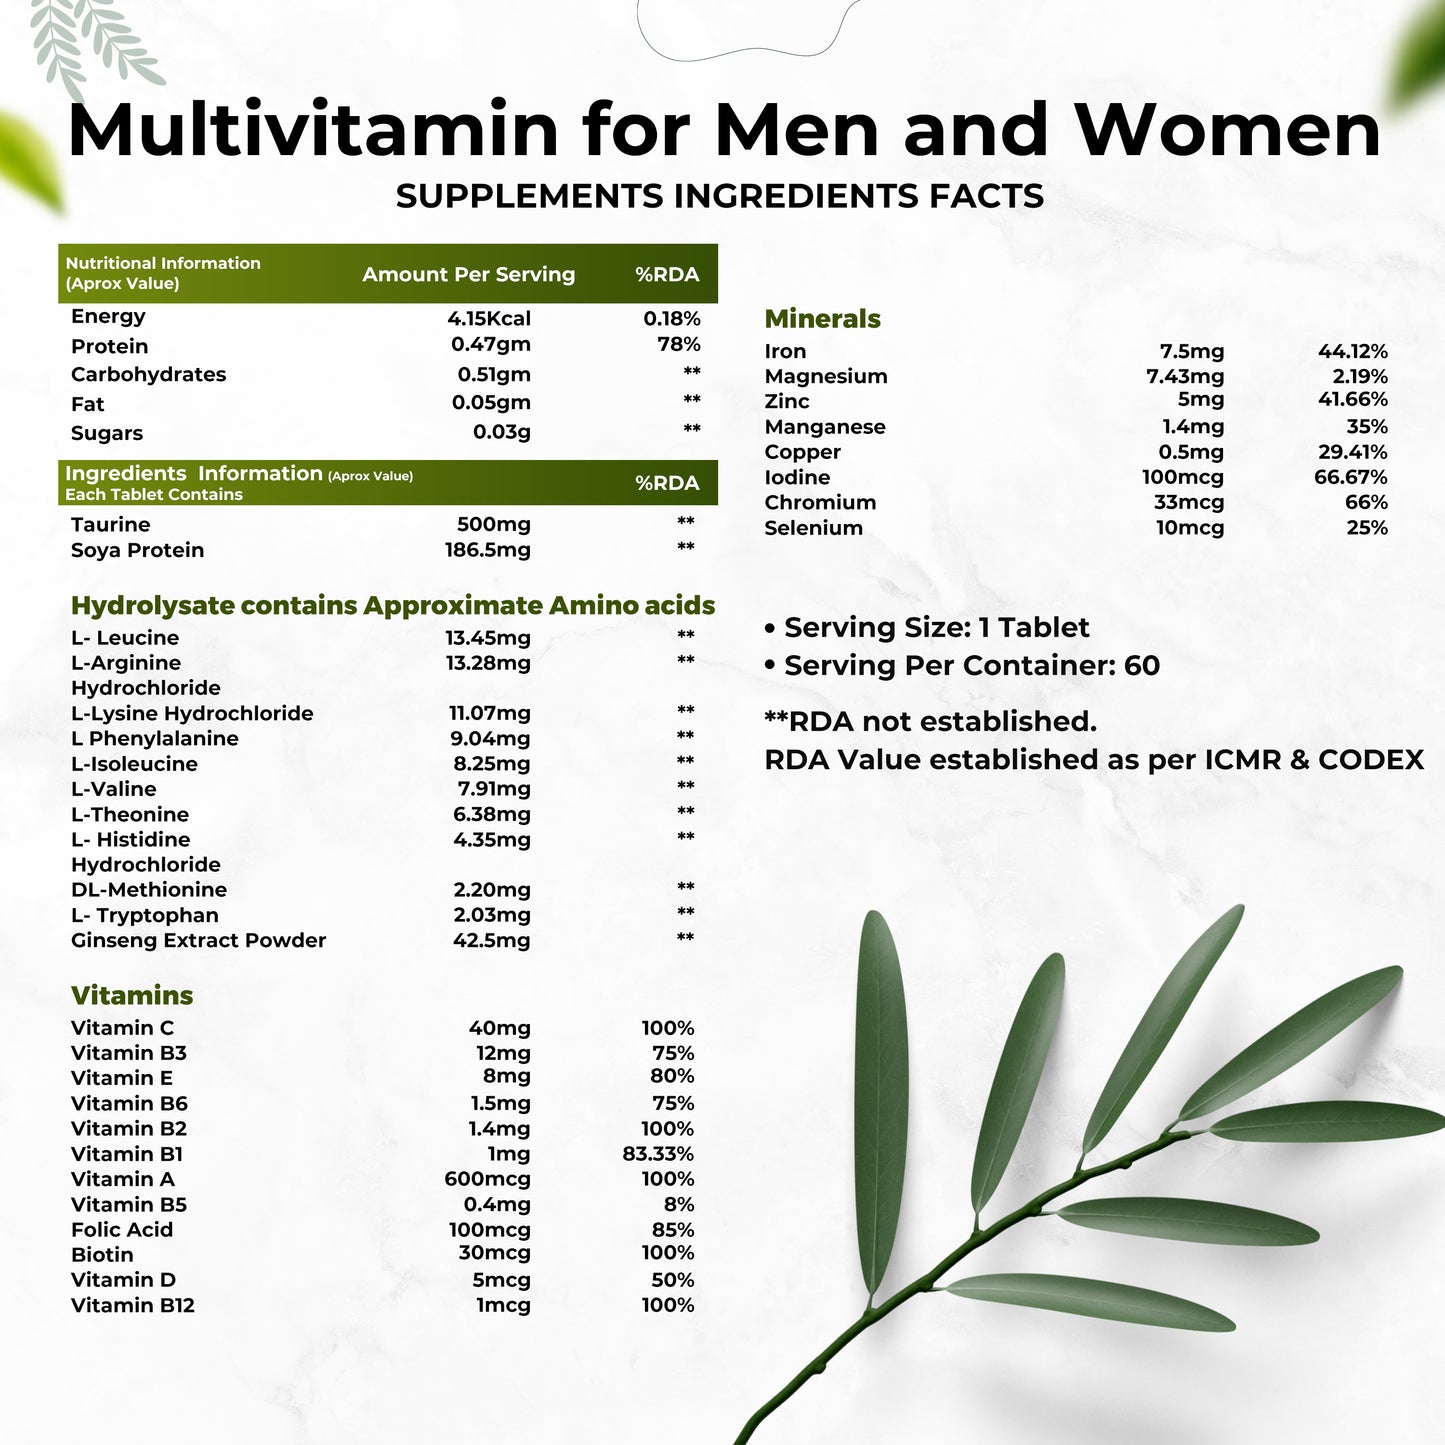 Health Veda Organics Multivitamin for Men and Women with Zinc, Vitamin C, Vitamin D3, Multiminerals & Ginseng Extract | 60 Veg Tablets